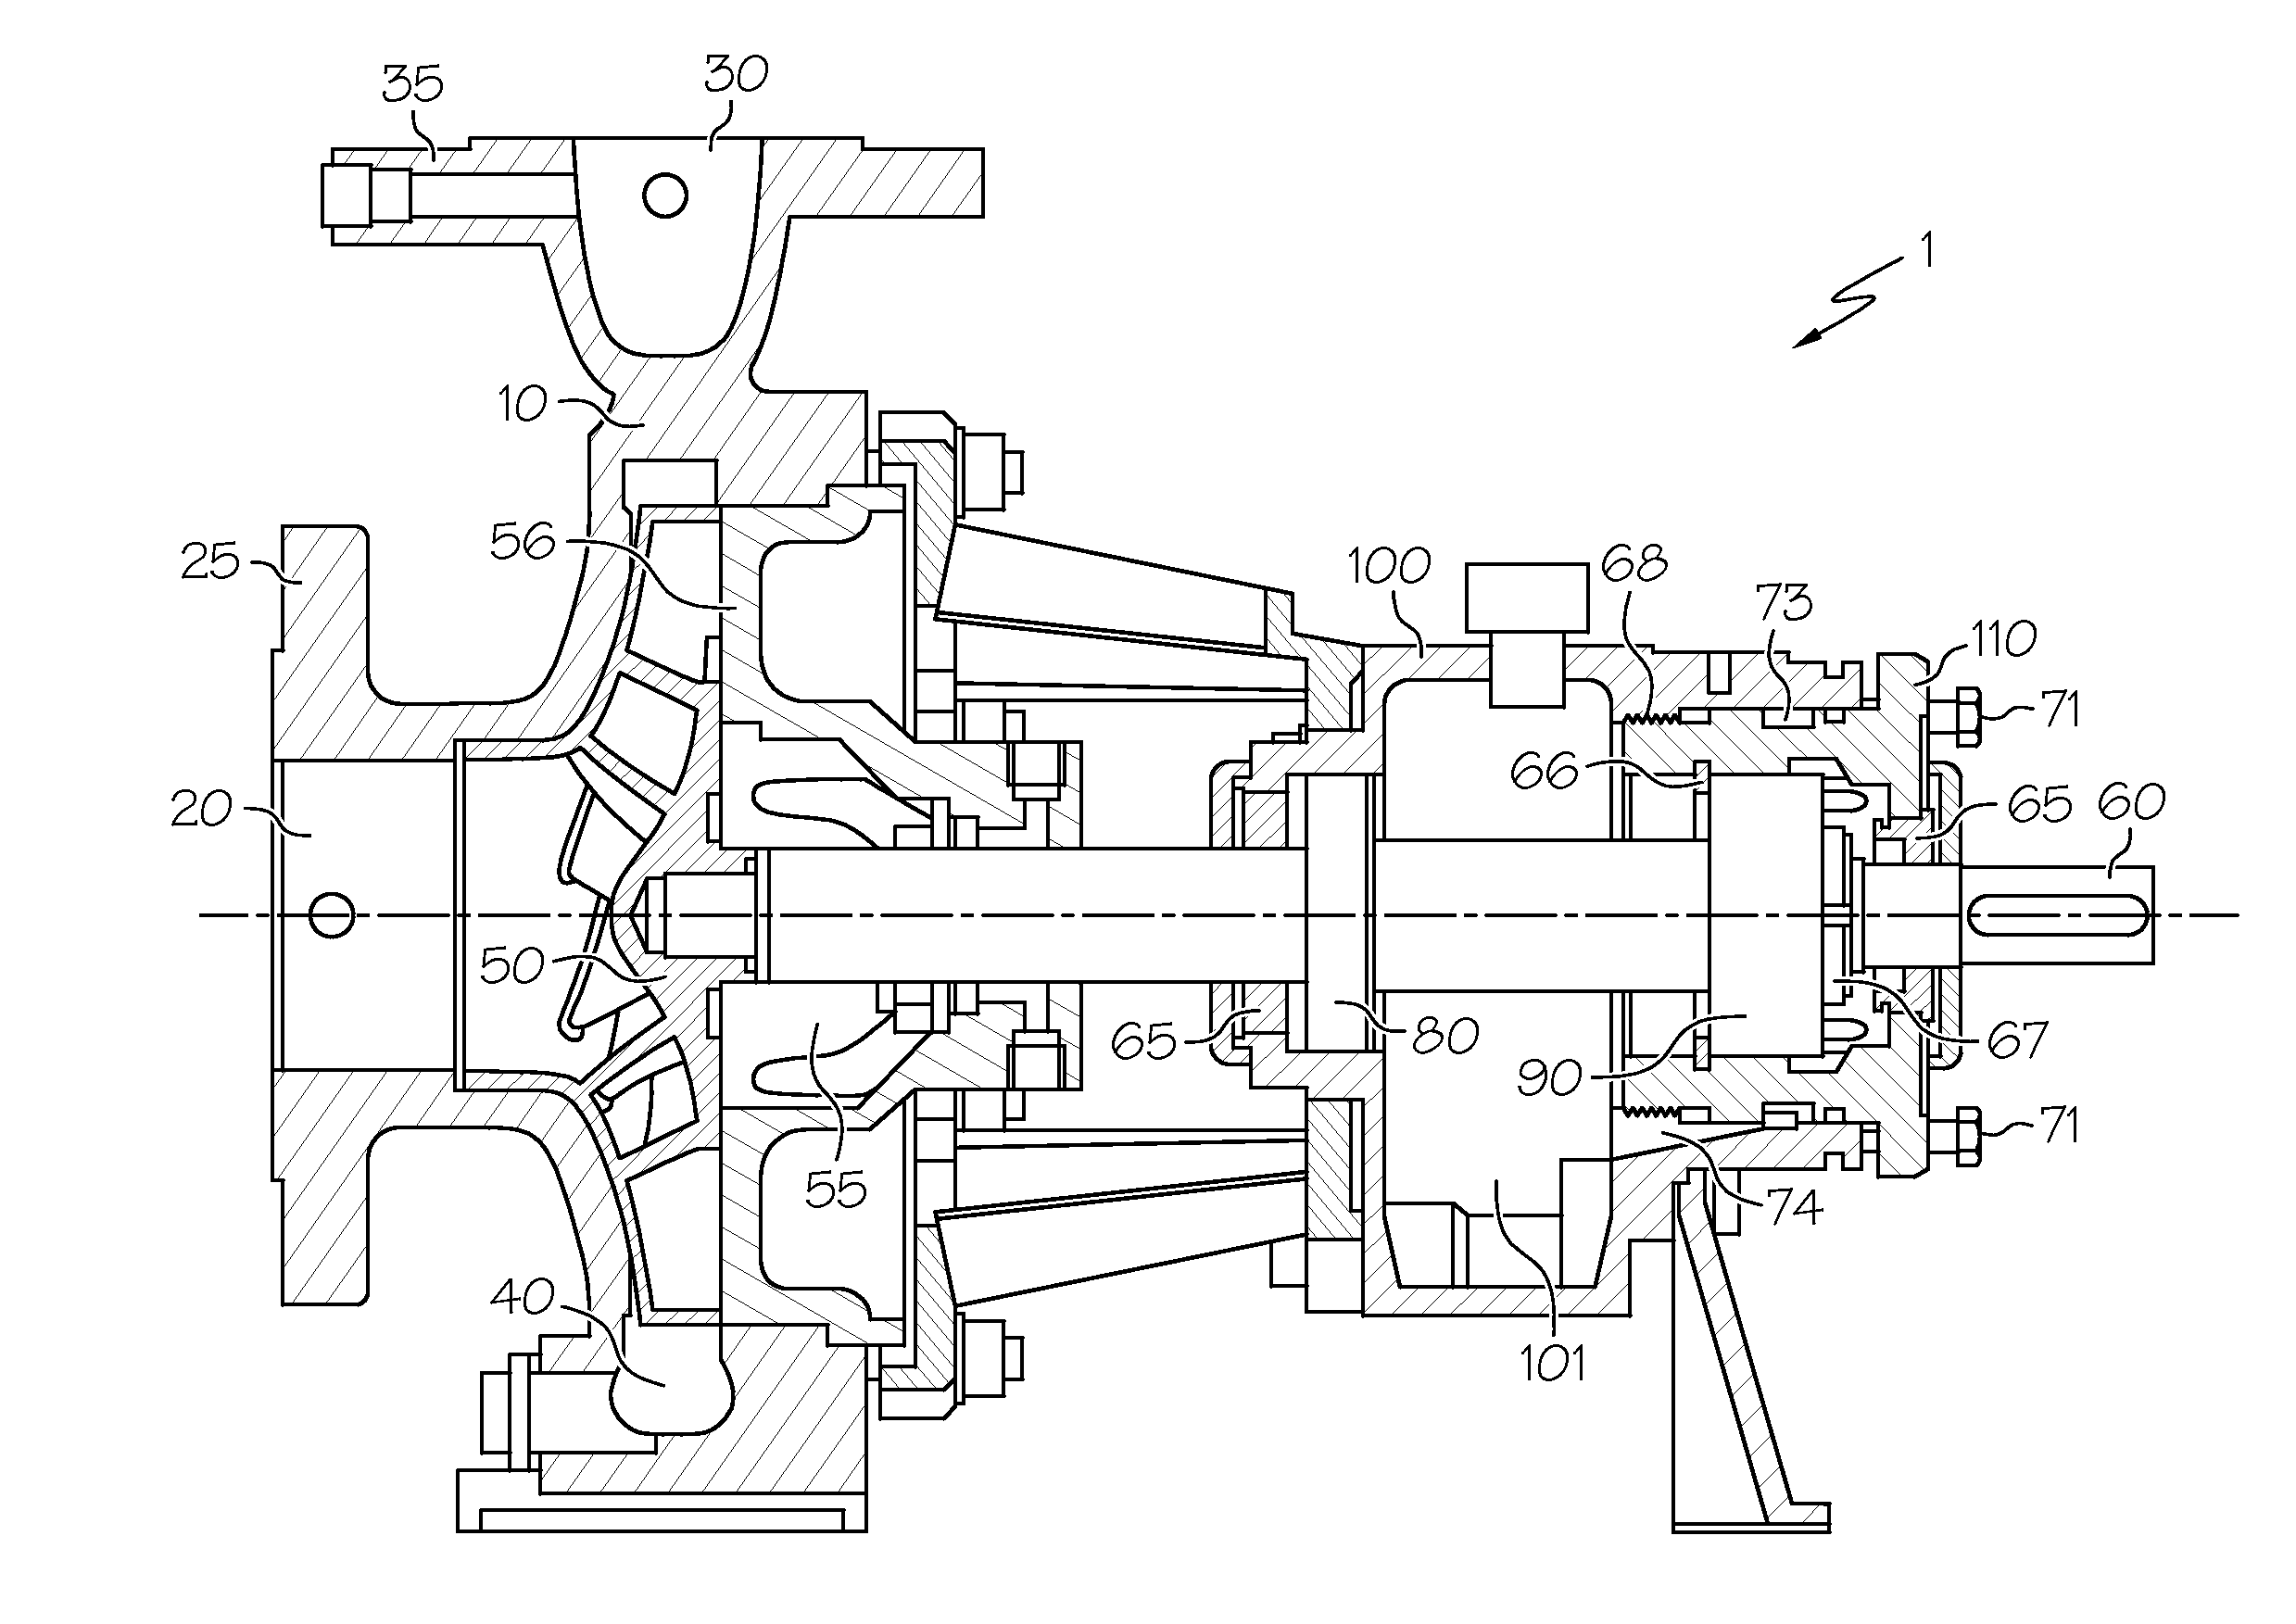 Bearing carrier with multiple lubrication slots